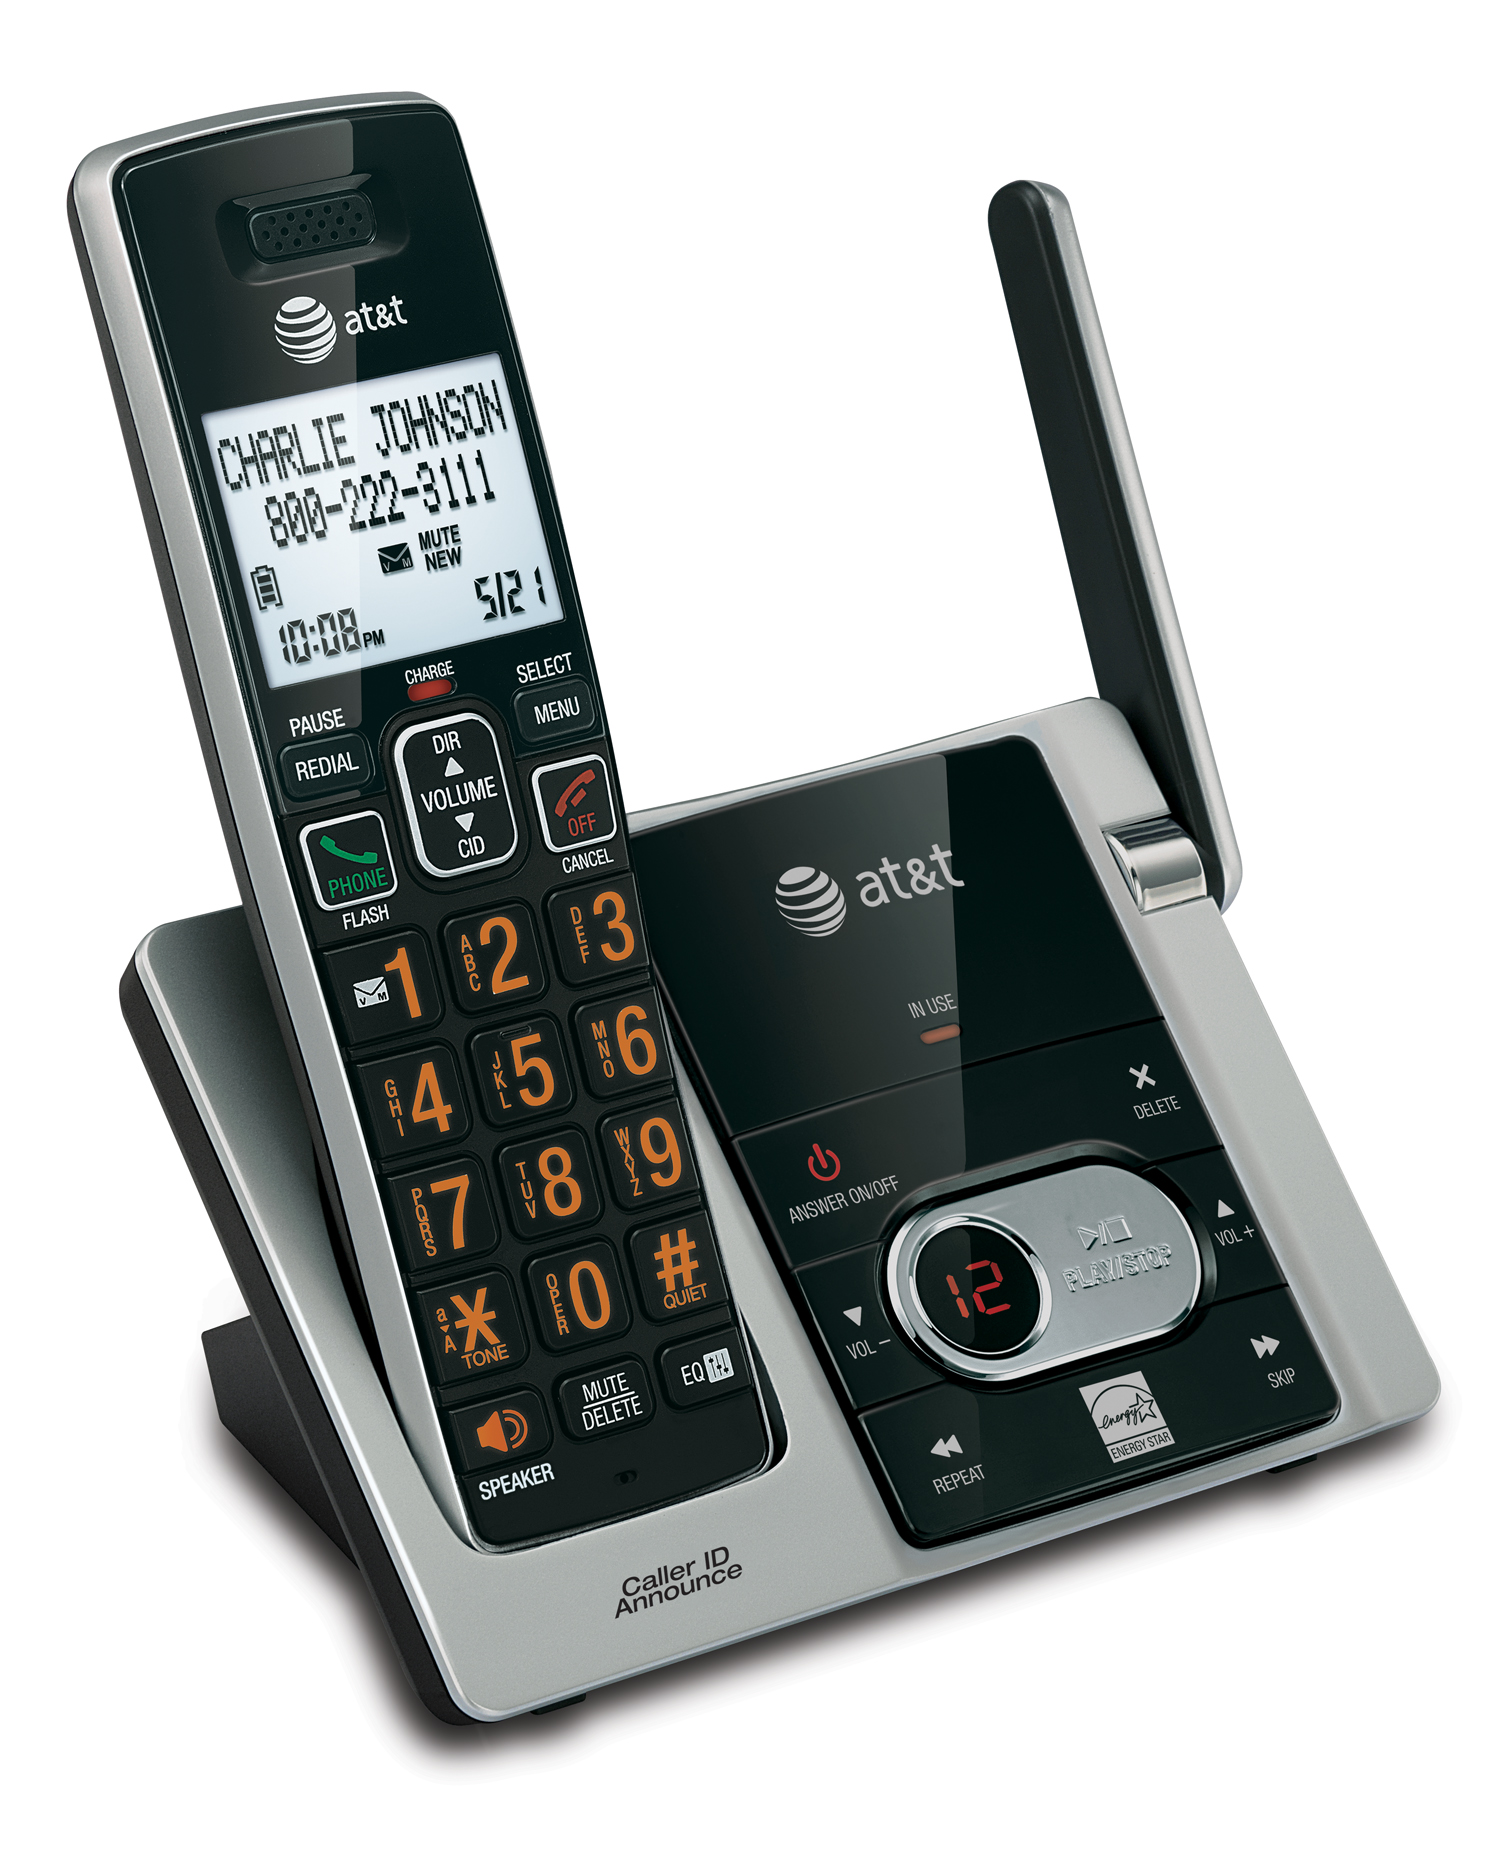 2 handset cordless answering system with caller ID/call waiting - view 3